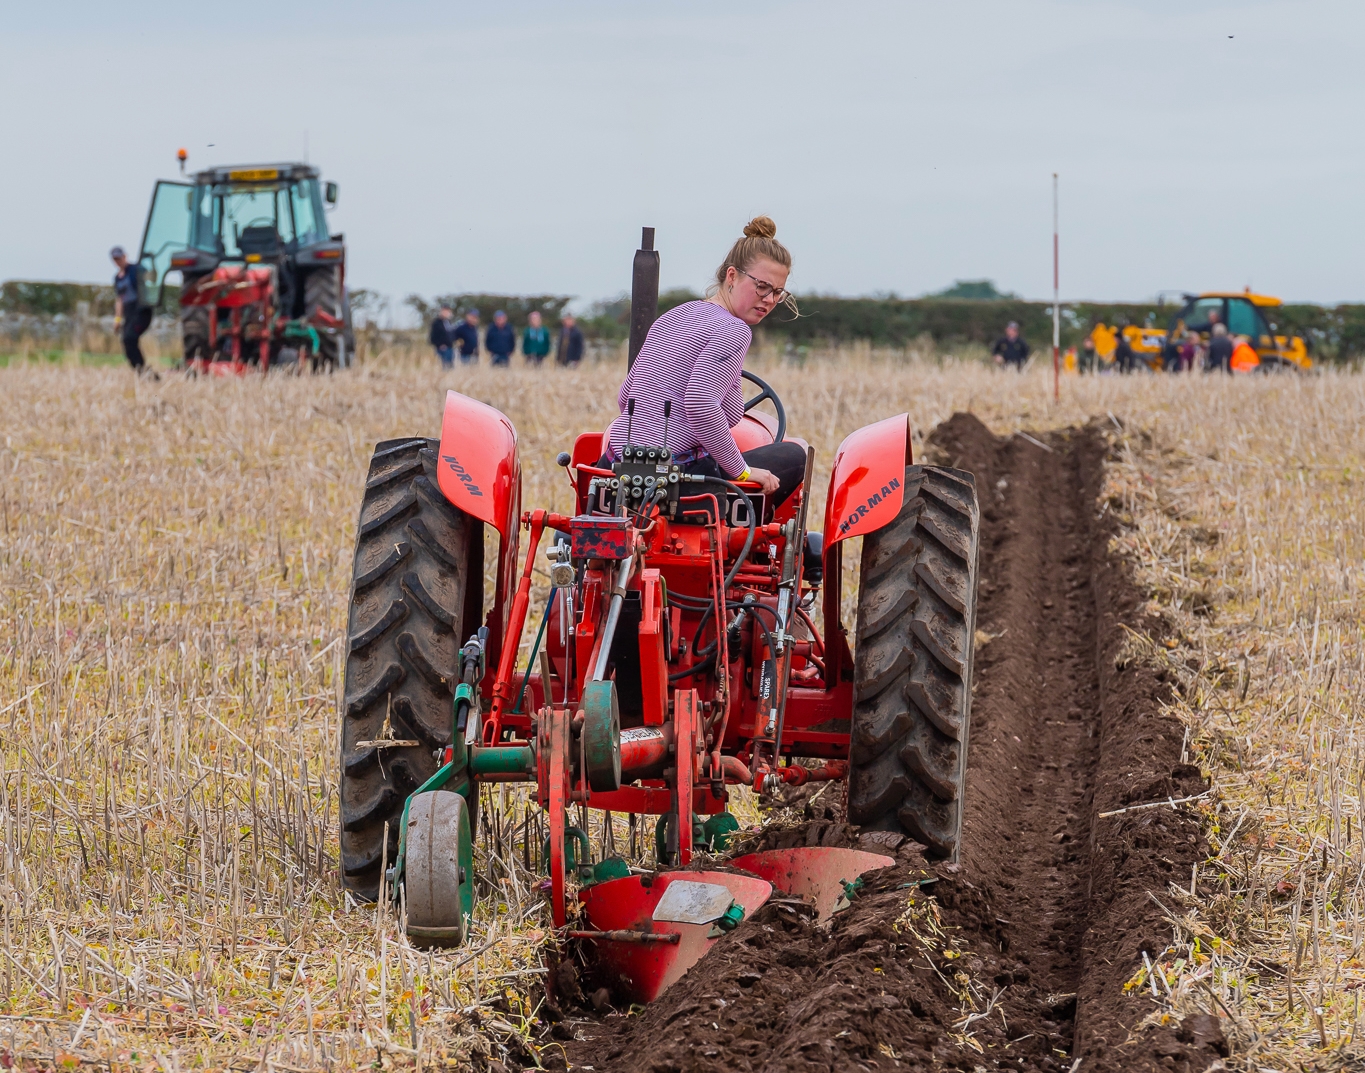 The British National Ploughing Championships is back for its 72nd year!